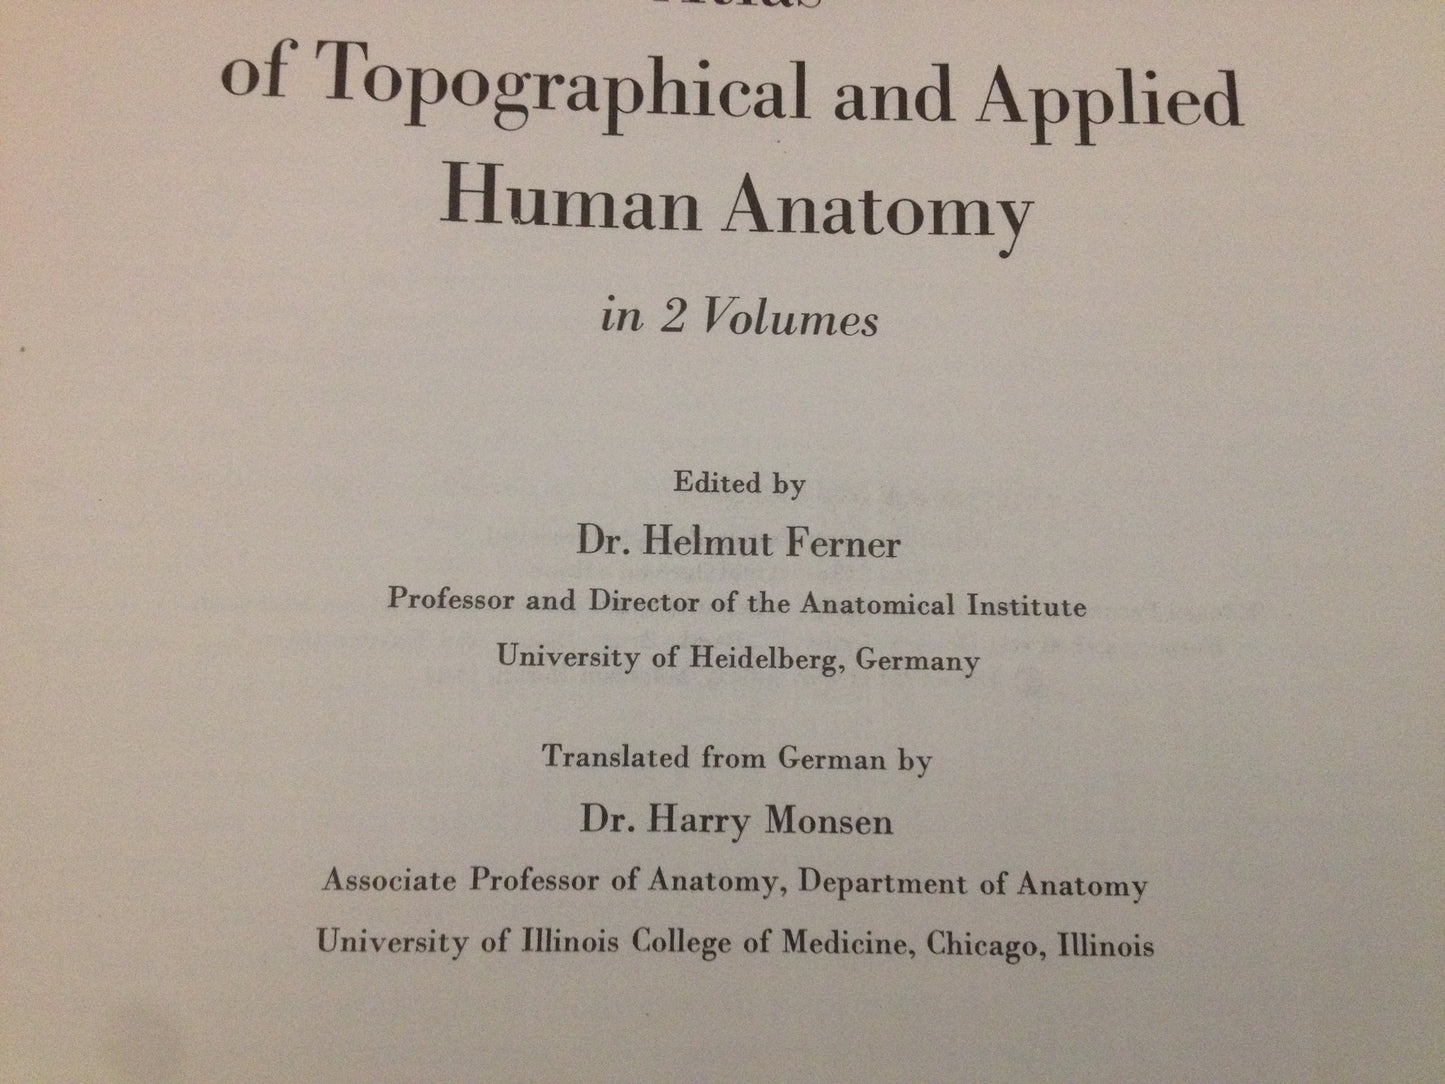 ATLAS OF TOPOGRAPHICAL AND APPLIED HUMAN ANATOMY - EDUARD PERNKOPF